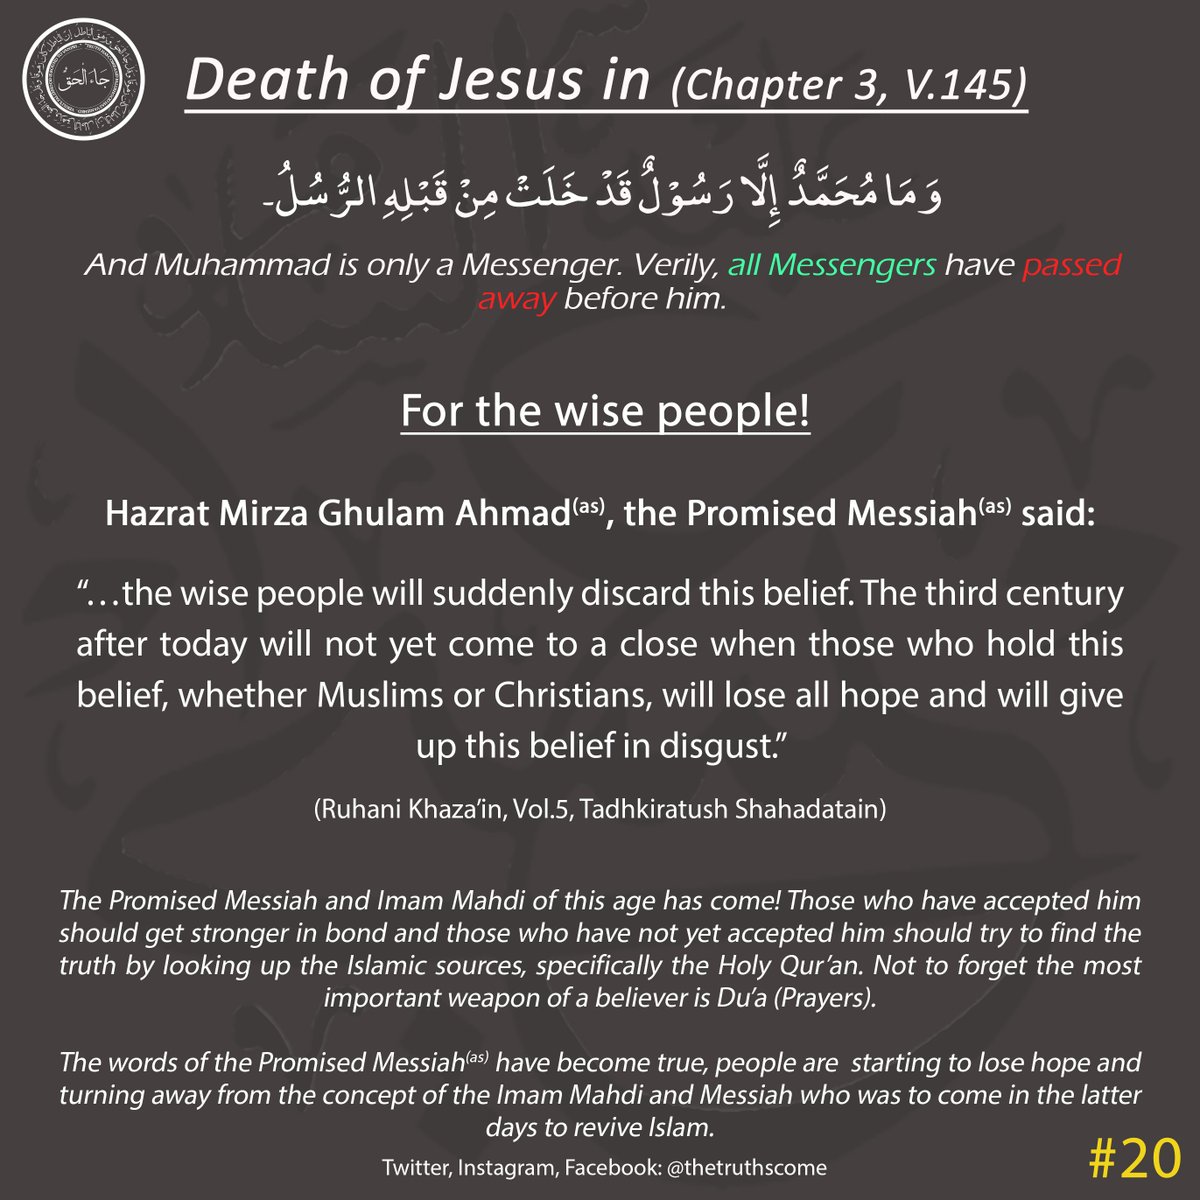 For the wise people! The Promised Messiah(as) said that Muslims and Christians, all will lose hope and will give up this belief. Jesus son of Mary will not come back and passed away like the Holy Prophet(sa) and all other Prophets before him.  #Islam  #Ahmadiyyat